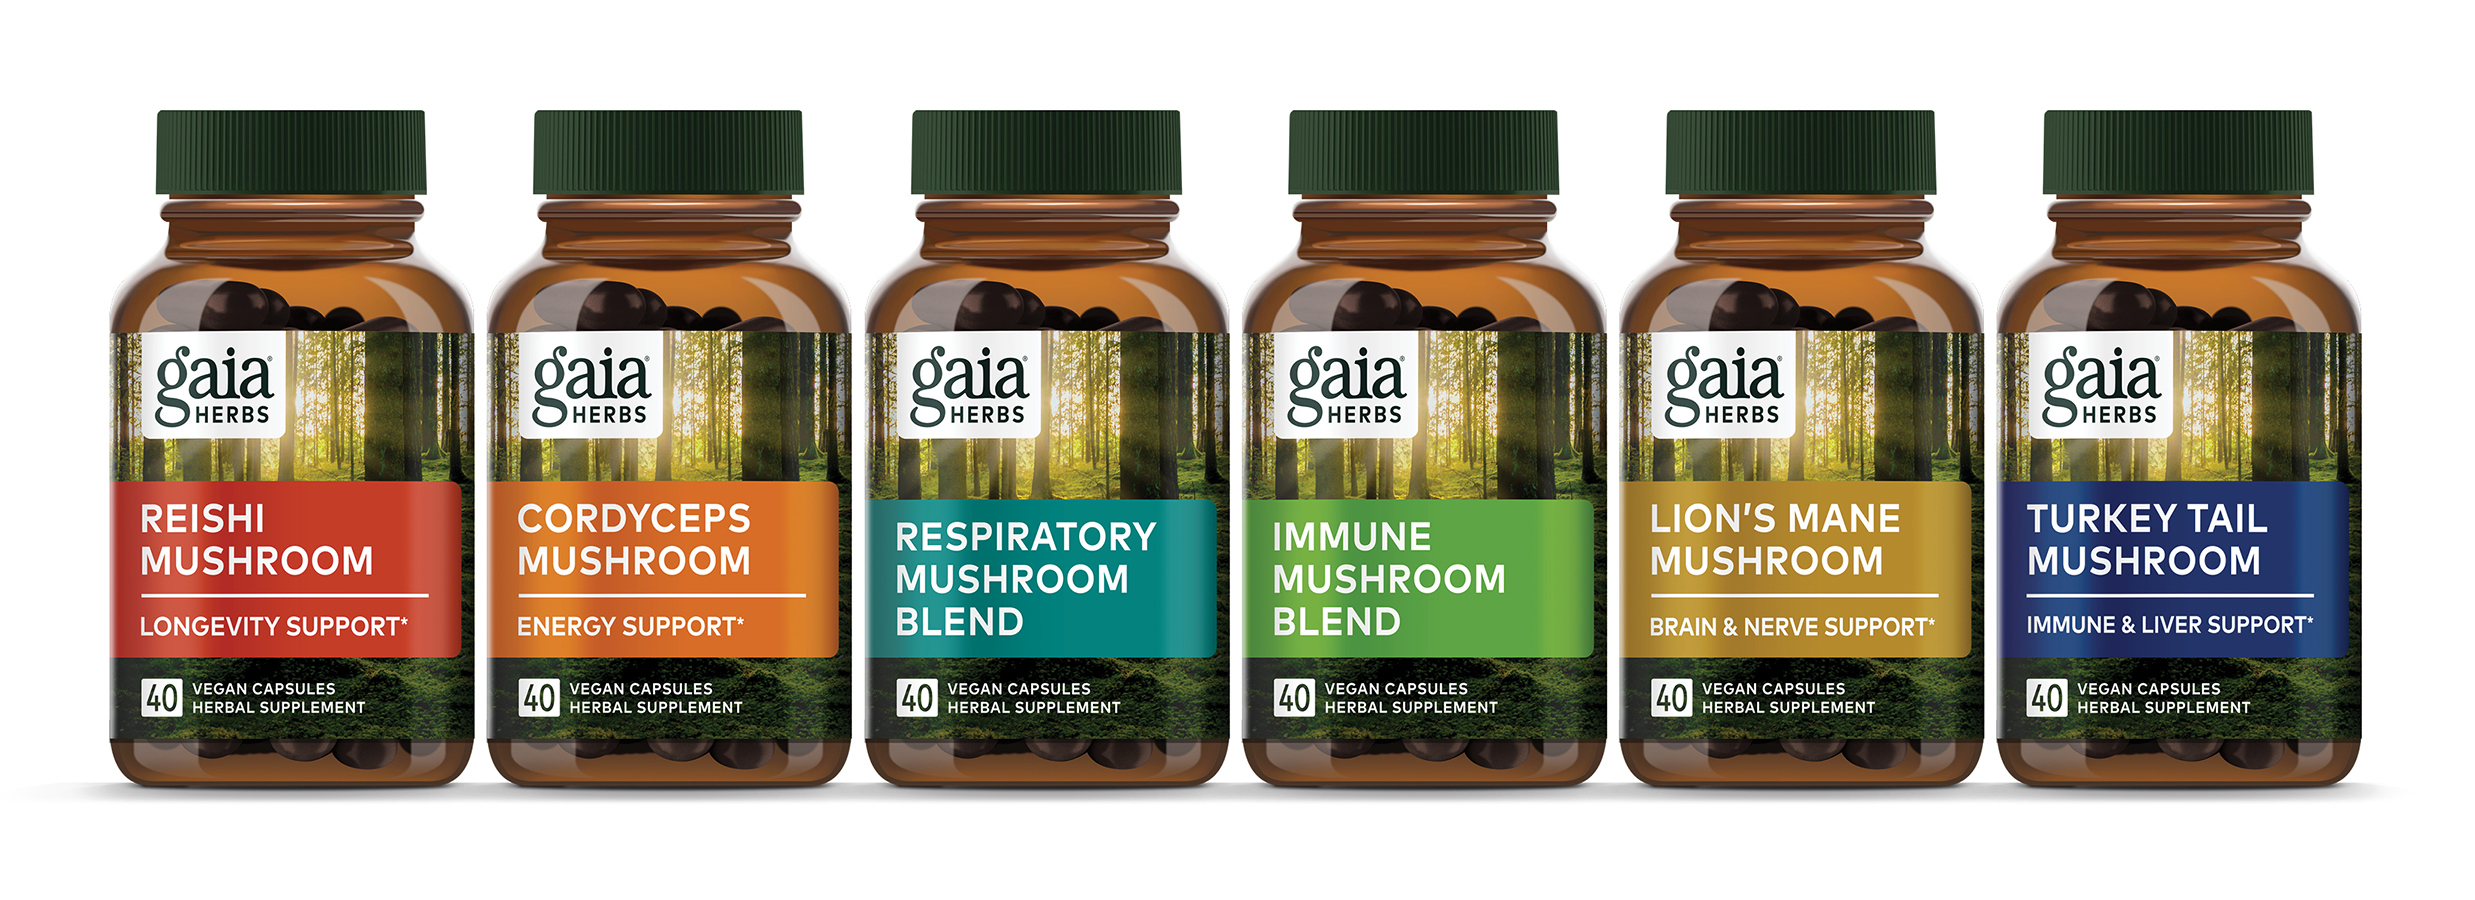 What Is Gaia Herbs Used For